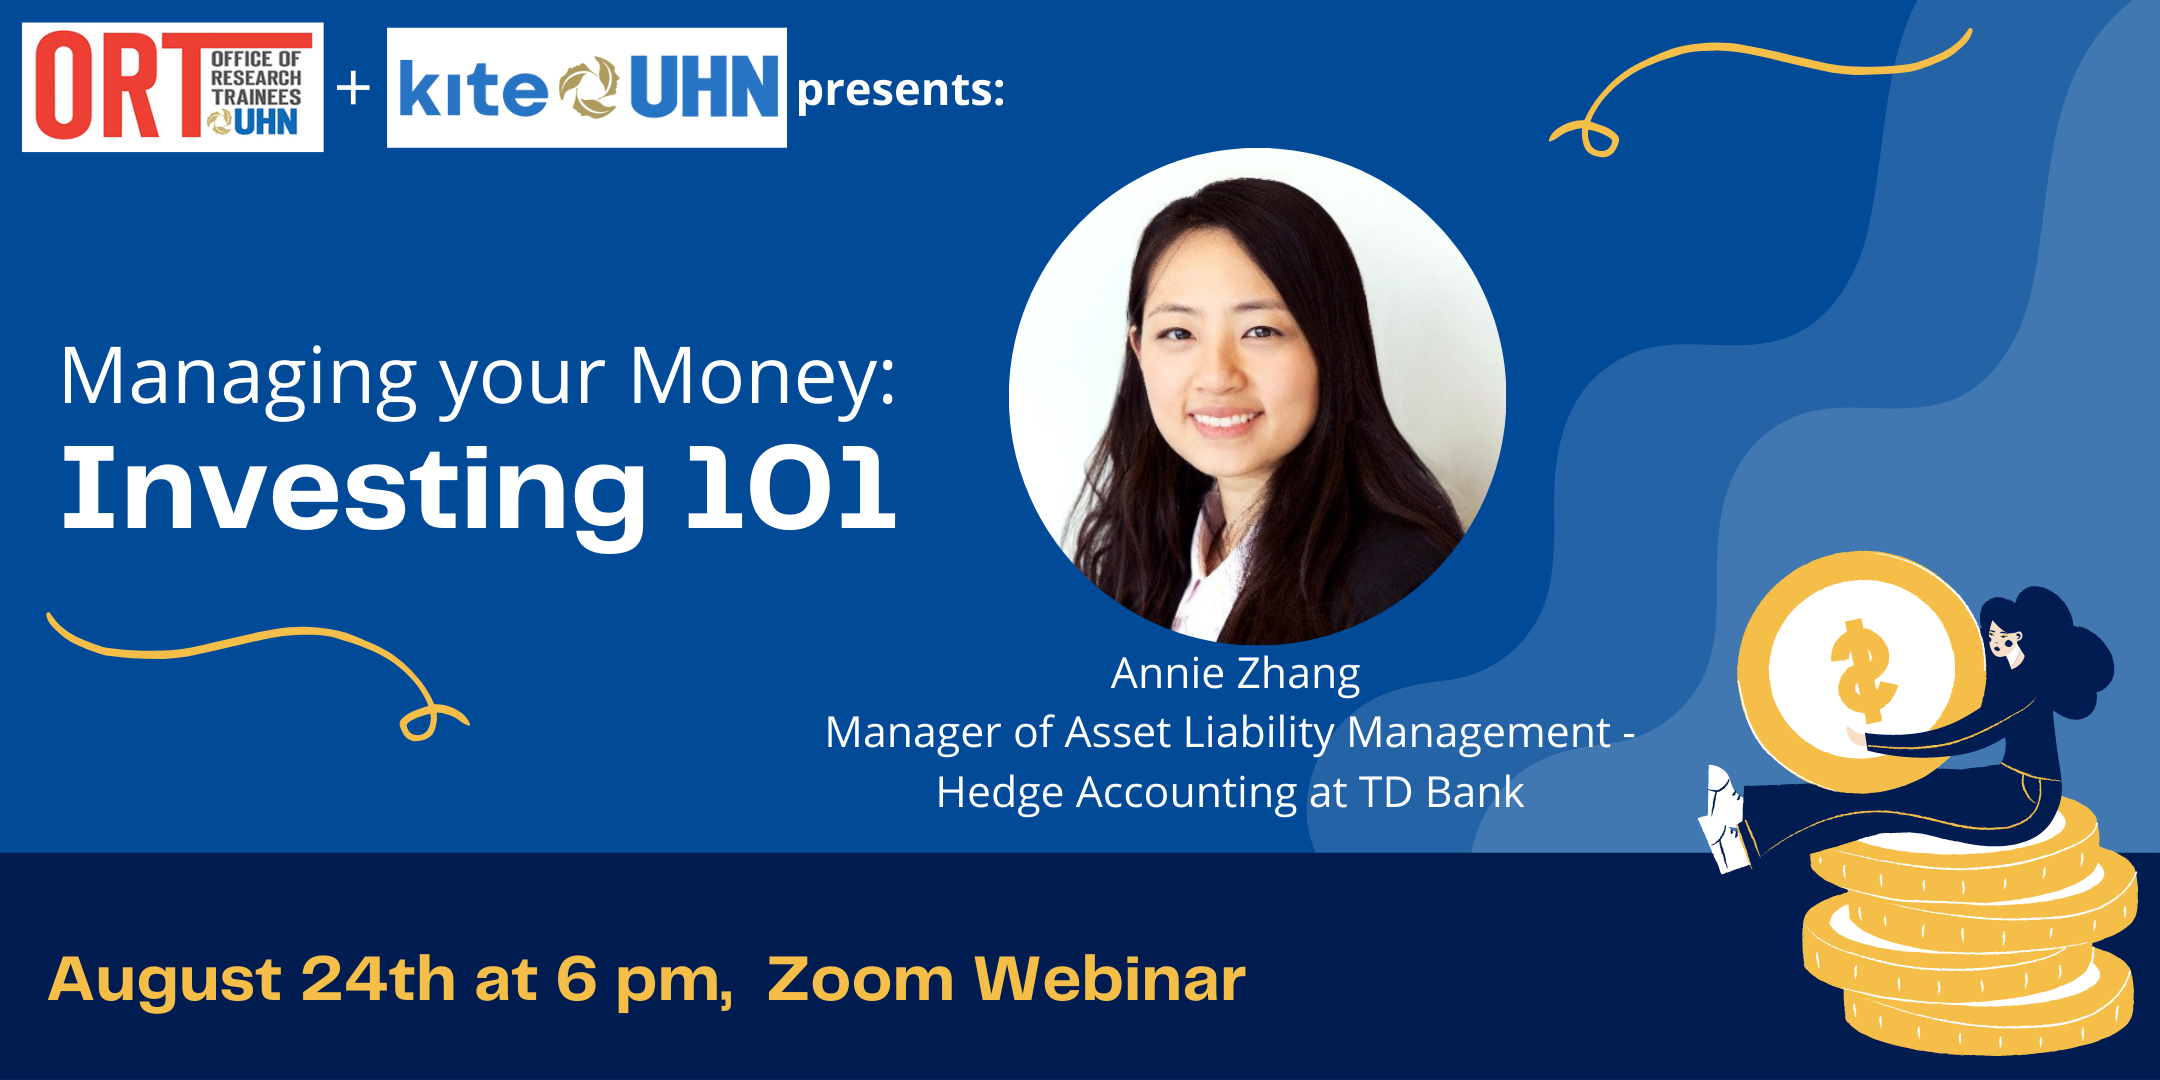 Poster for the Managing your Money: Investing 101 Workshop. The Office of Research Trainees and KITE at UHN logos are at the top left corner. On the right side of the poster is a photo of Annie Zhang. Below it reads: Annie Zhang, Manager of Asset Liability Management- Hedge Accounting at TD Bank. Along the bottom the poster reads: August 24th at 6 pm, Zoom webinar